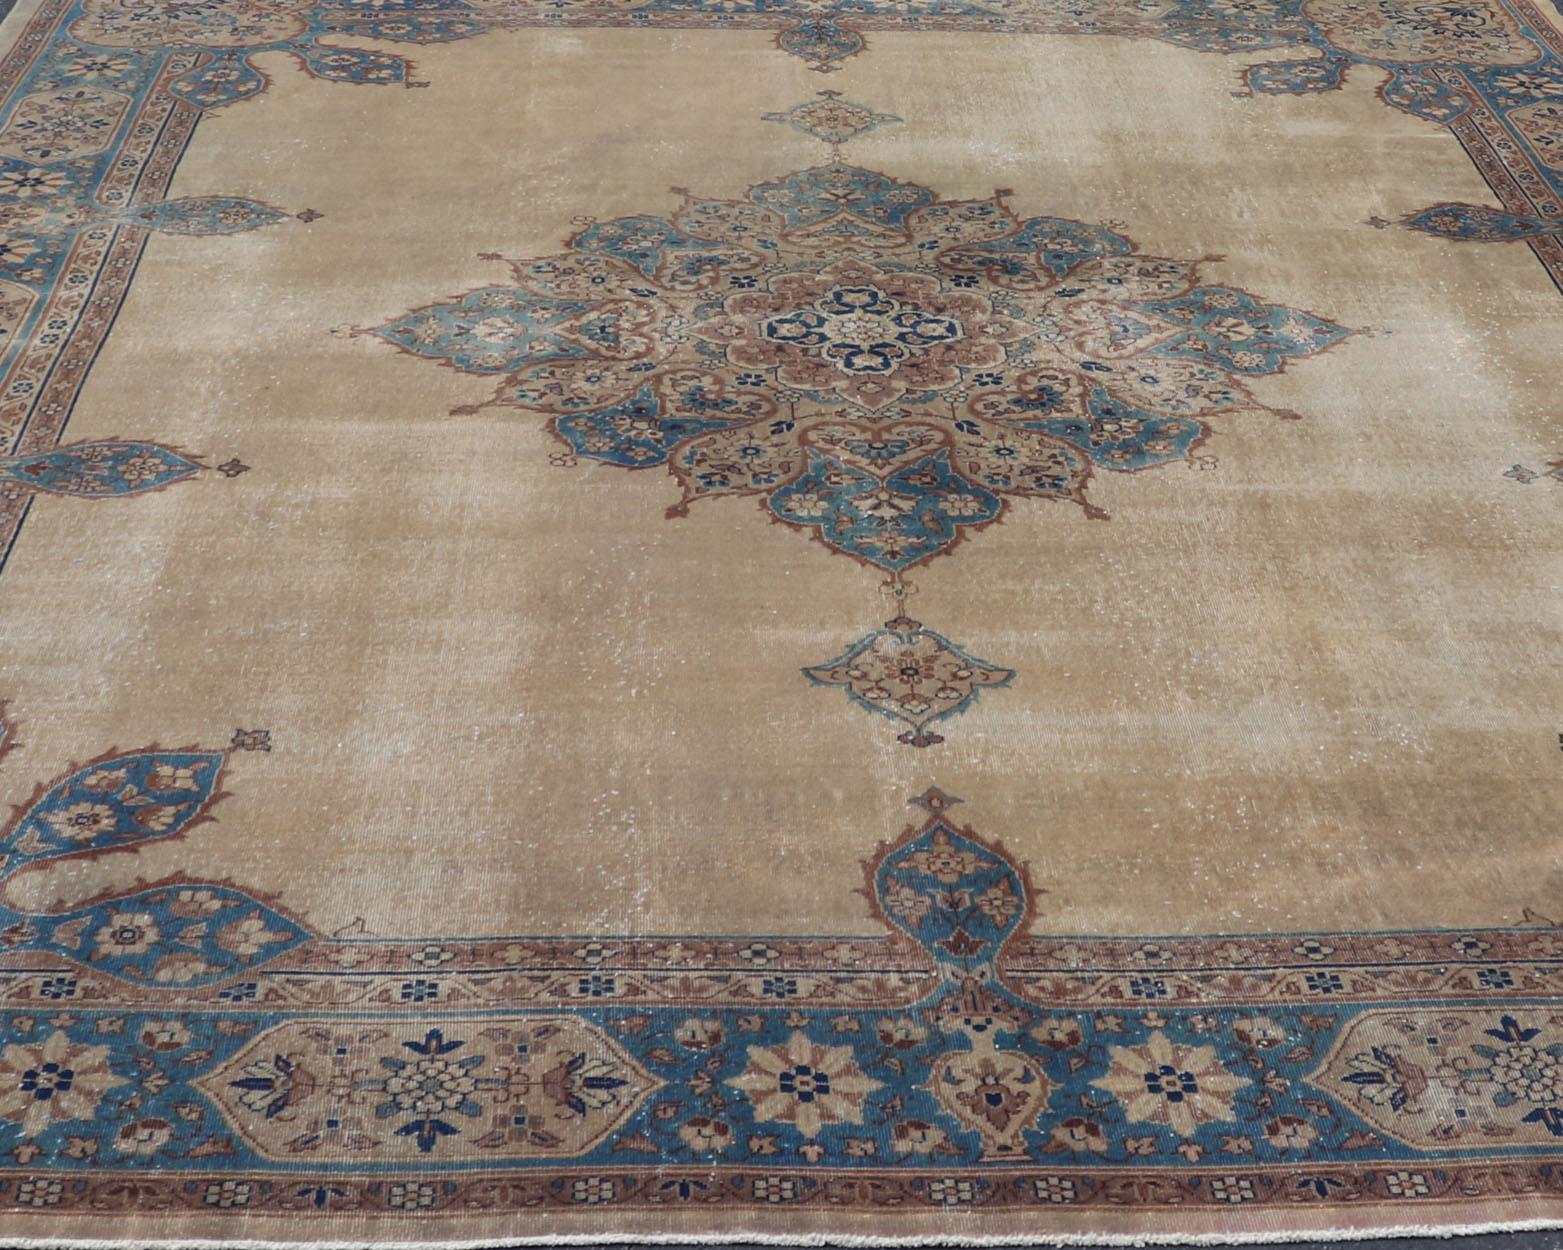 Antique Hand Knotted Amritsar Carpet in Taupe, Light Brown and Blue Accent's, Keivan Woven Arts / rug / TRA-5101. 1920 circa Early 20th Century. / Antique Amritsar, Antique Agra.
Measures: 12' x 15'.
This antique Amritsar features a classical design